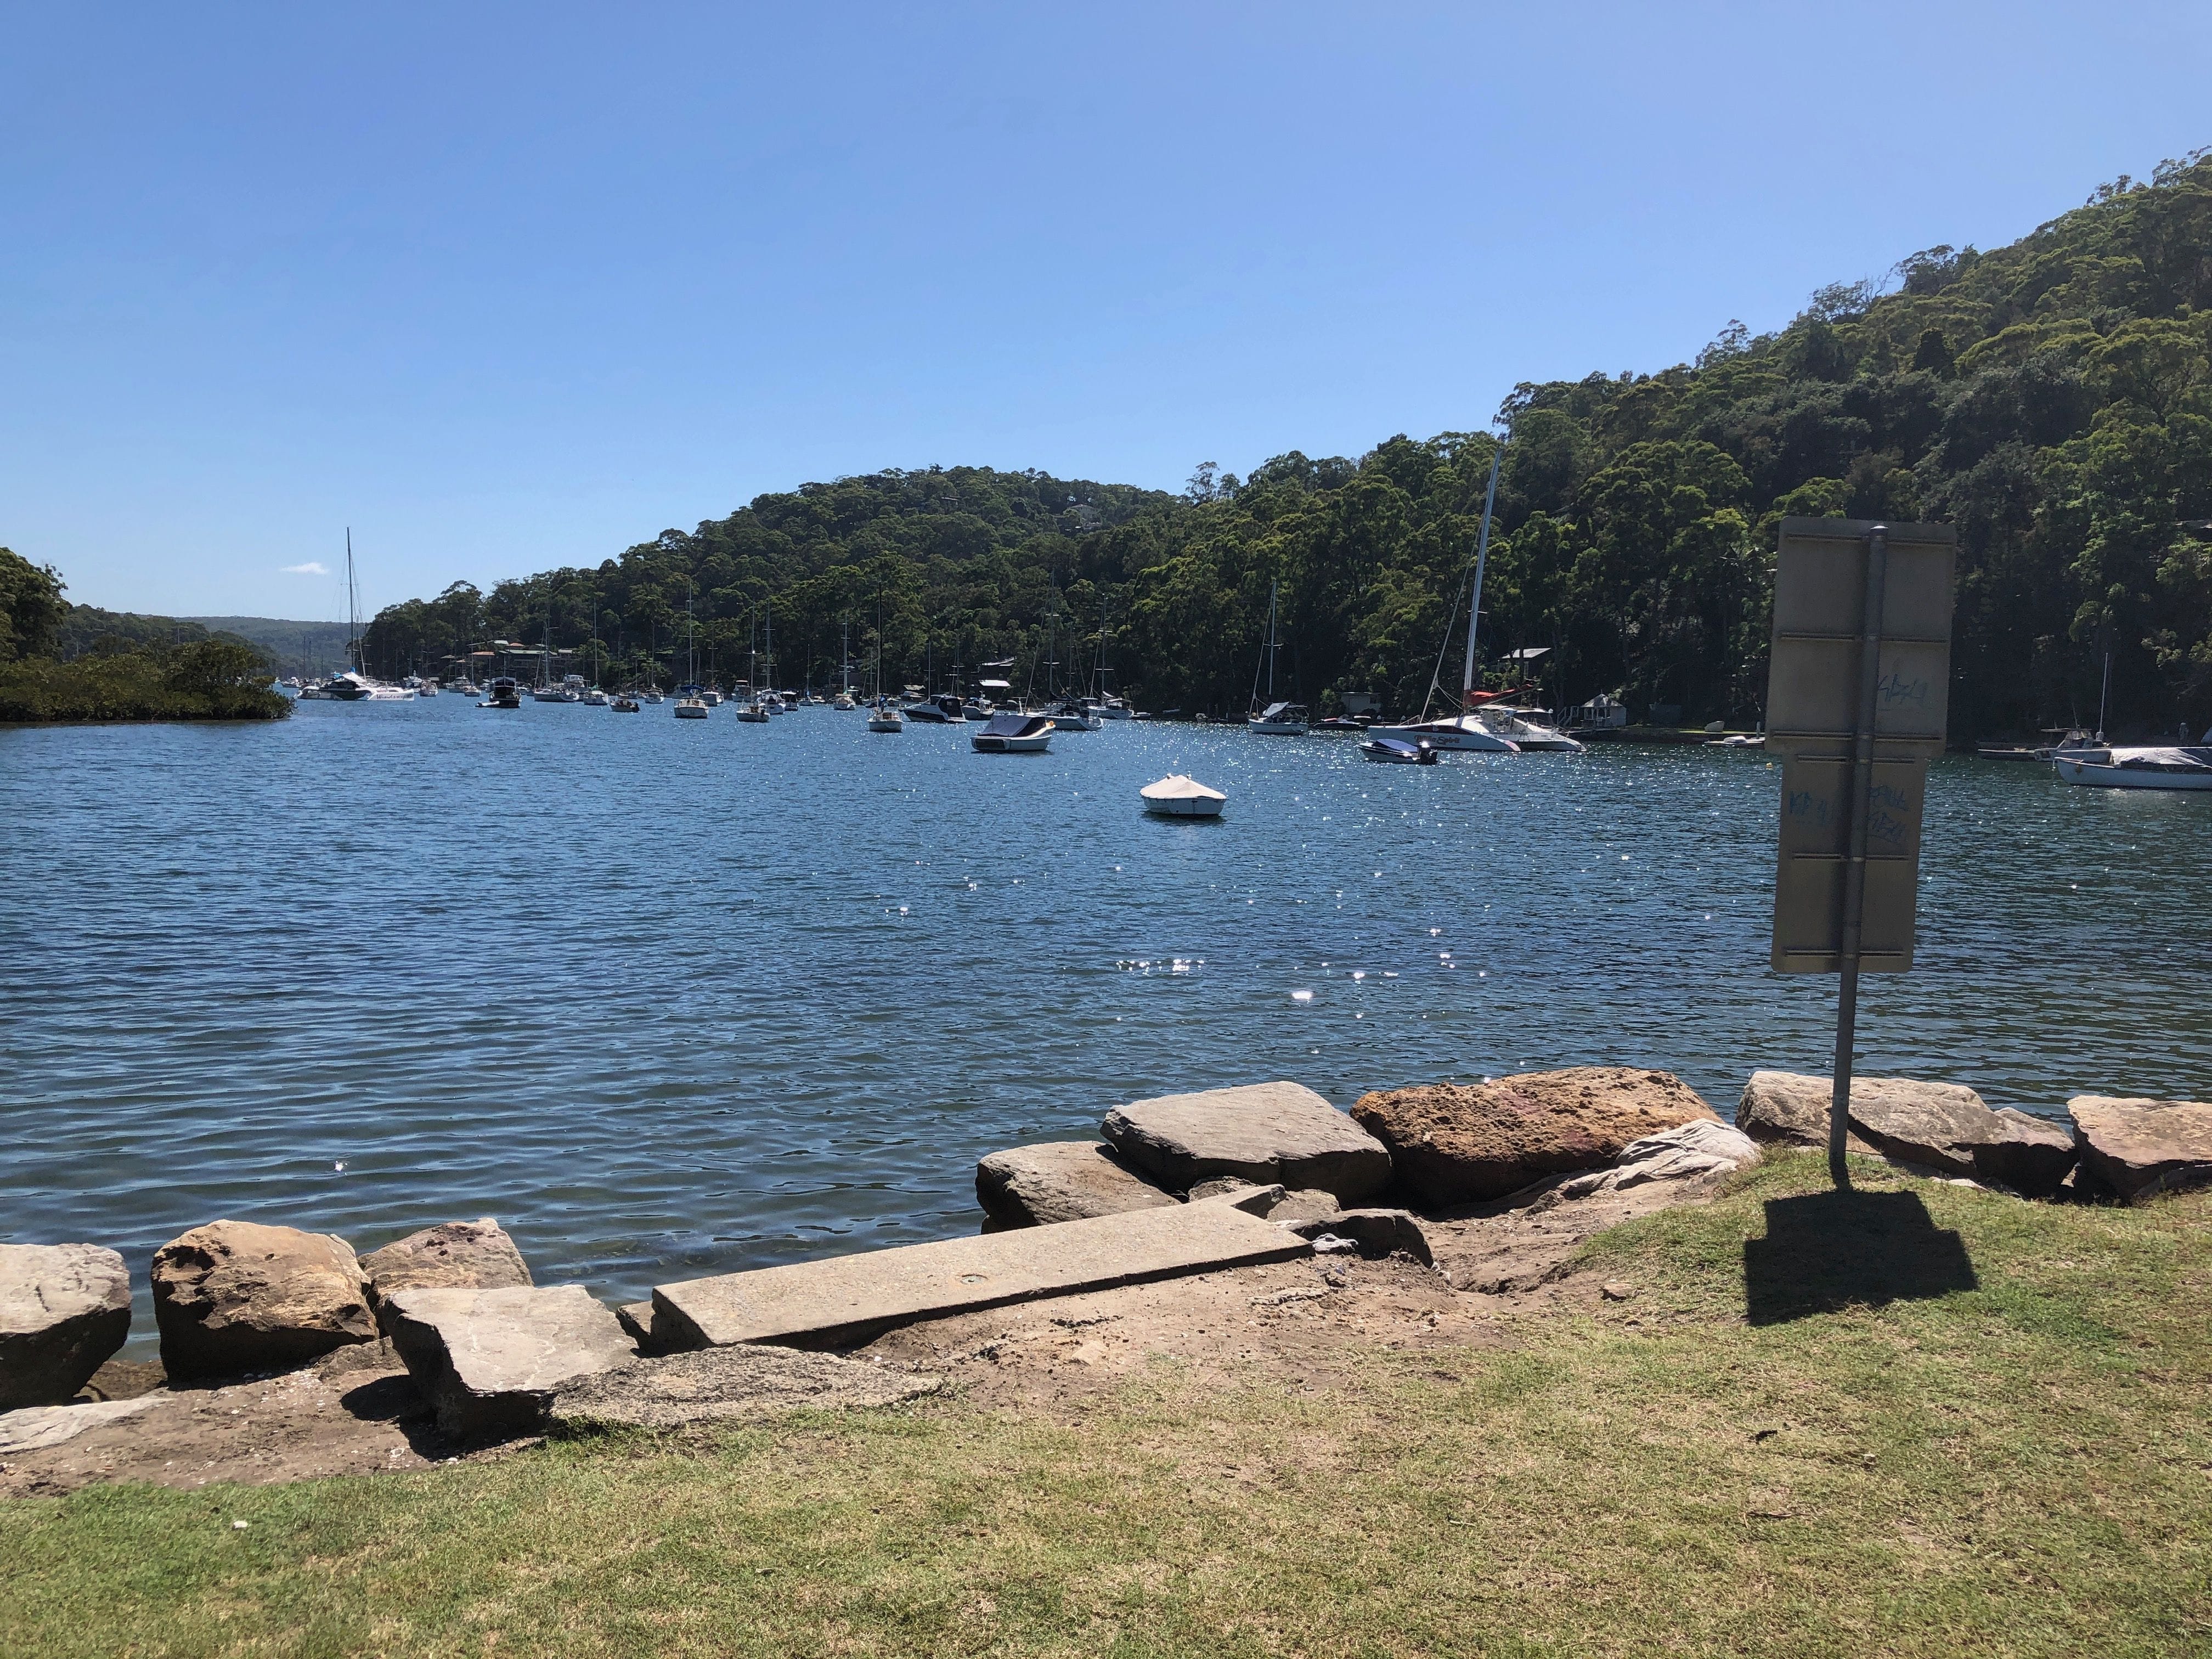 Northern Beaches Public Day Tour febuary 2019 Image -5c64962d55730